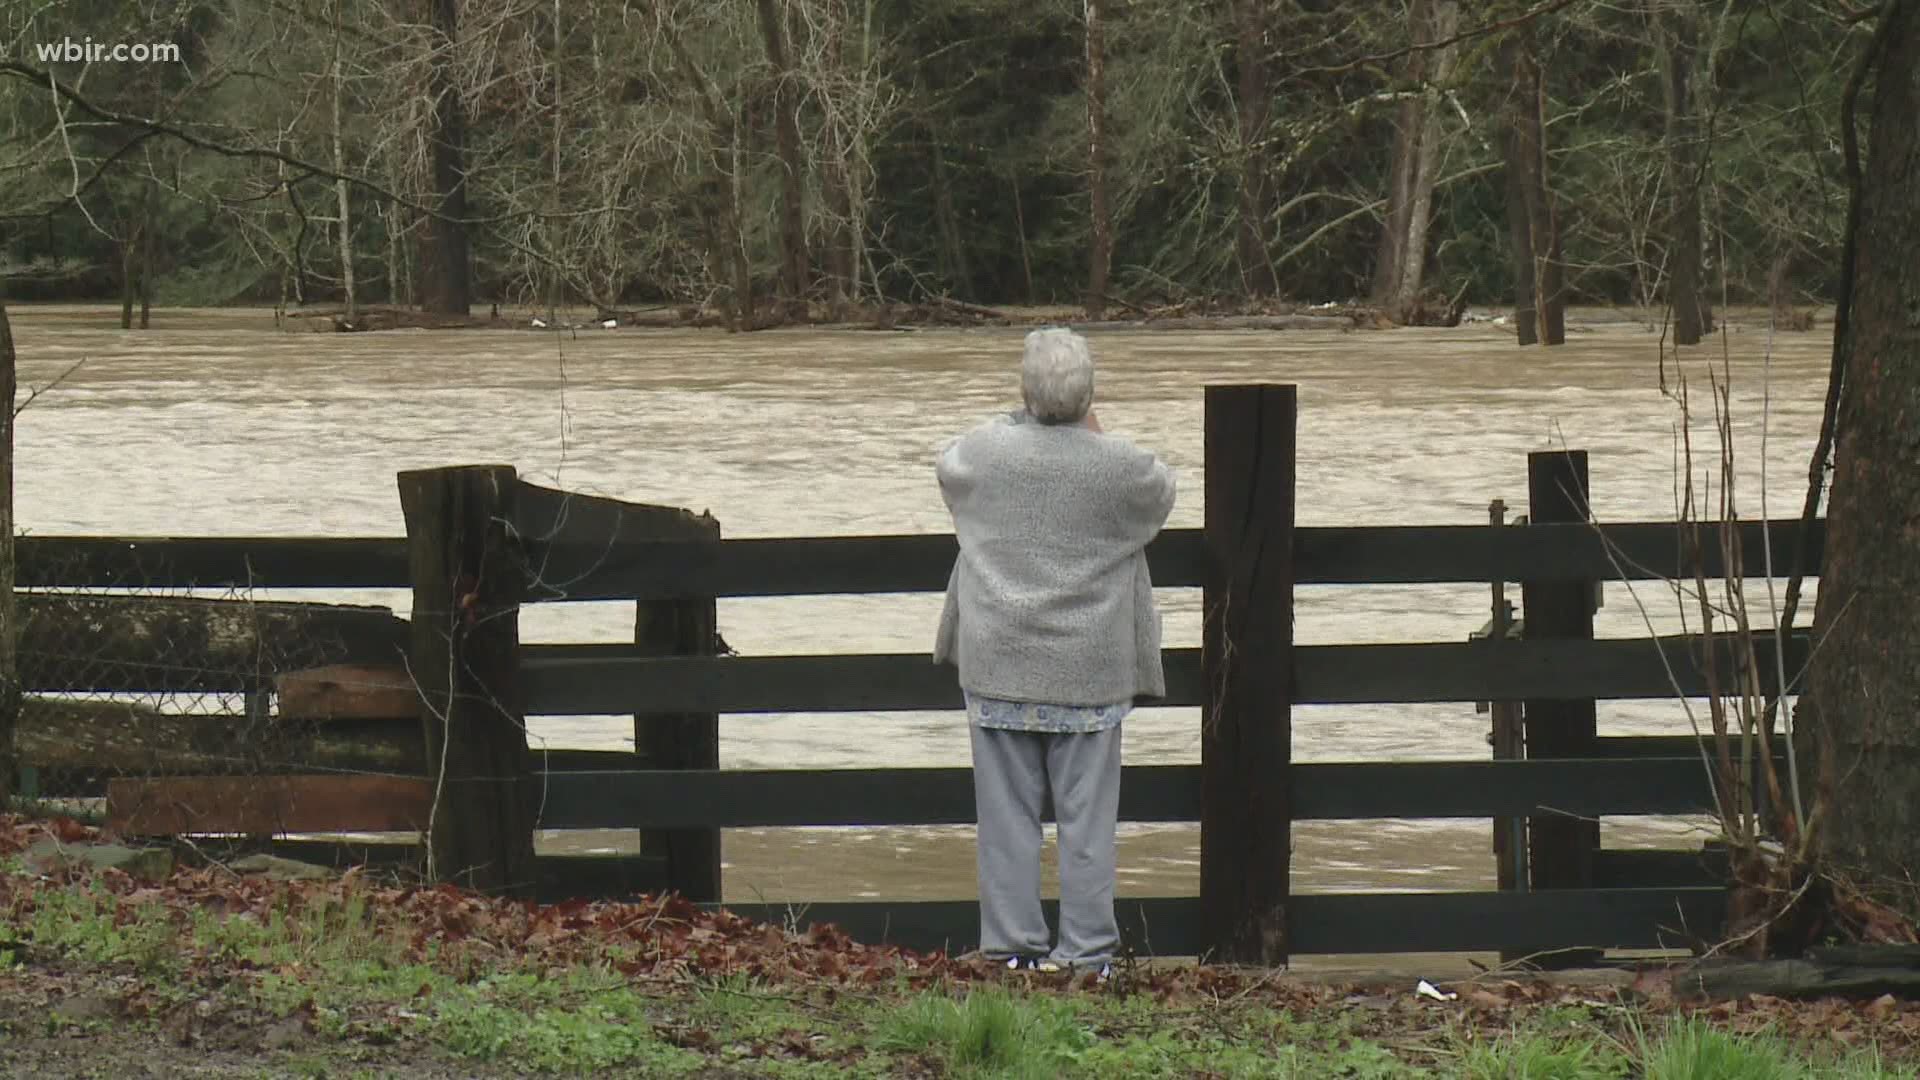 Destructive floods hit across the region Sunday, but one of the hardest-hit areas was Campbell County near LaFollette.